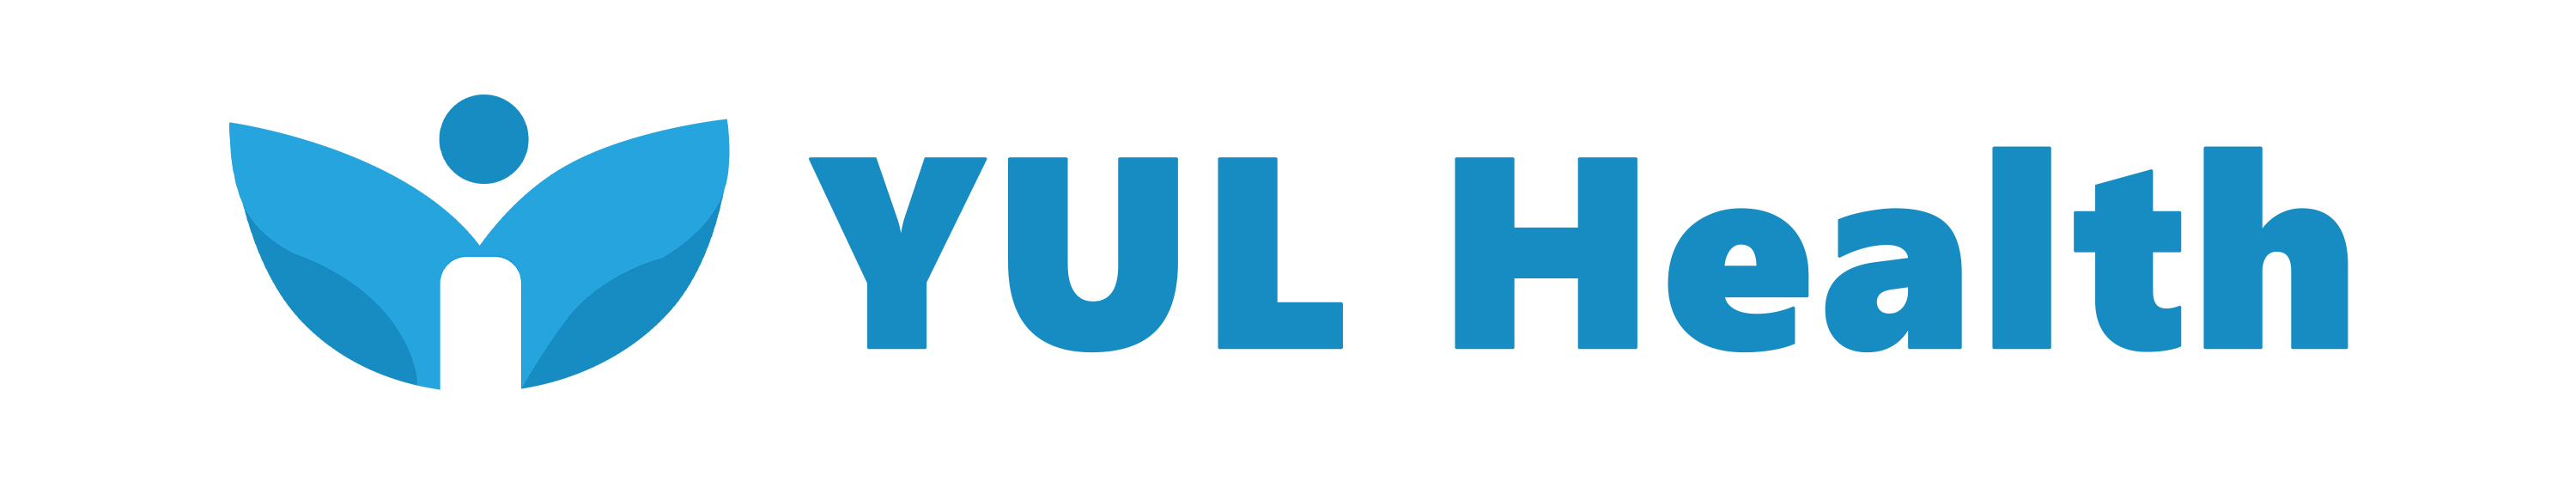 Yul Health - Favicon. Recognizable Yul Health logo. A symbol of trusted healthcare services. Visit our website for comprehensive medical and laboratory services. Your health, our priority